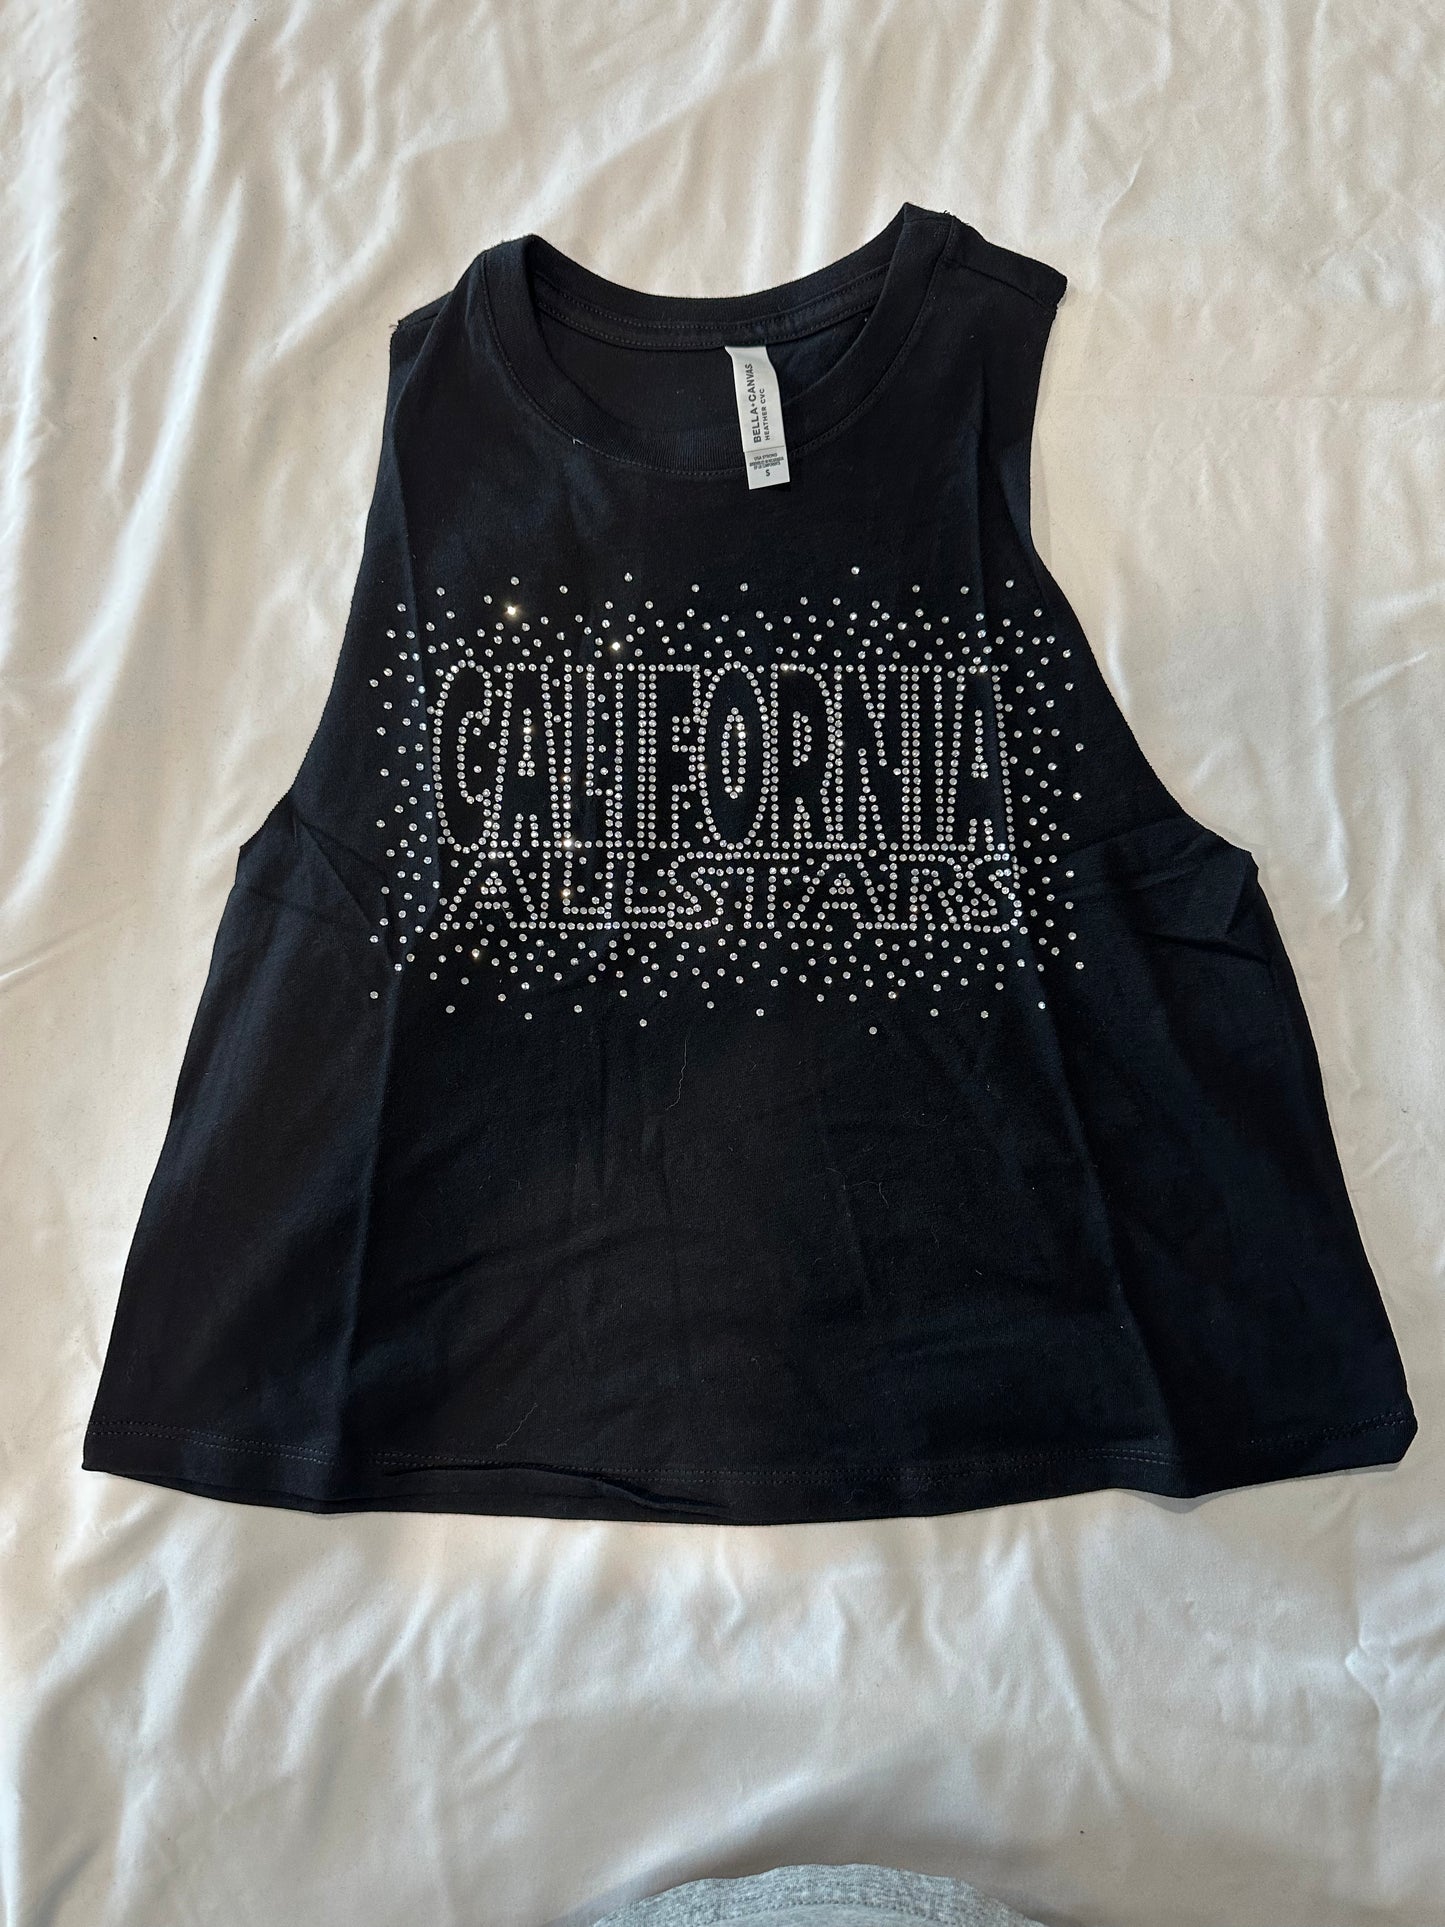 Black Crop Tank Top with Clear Bling Design